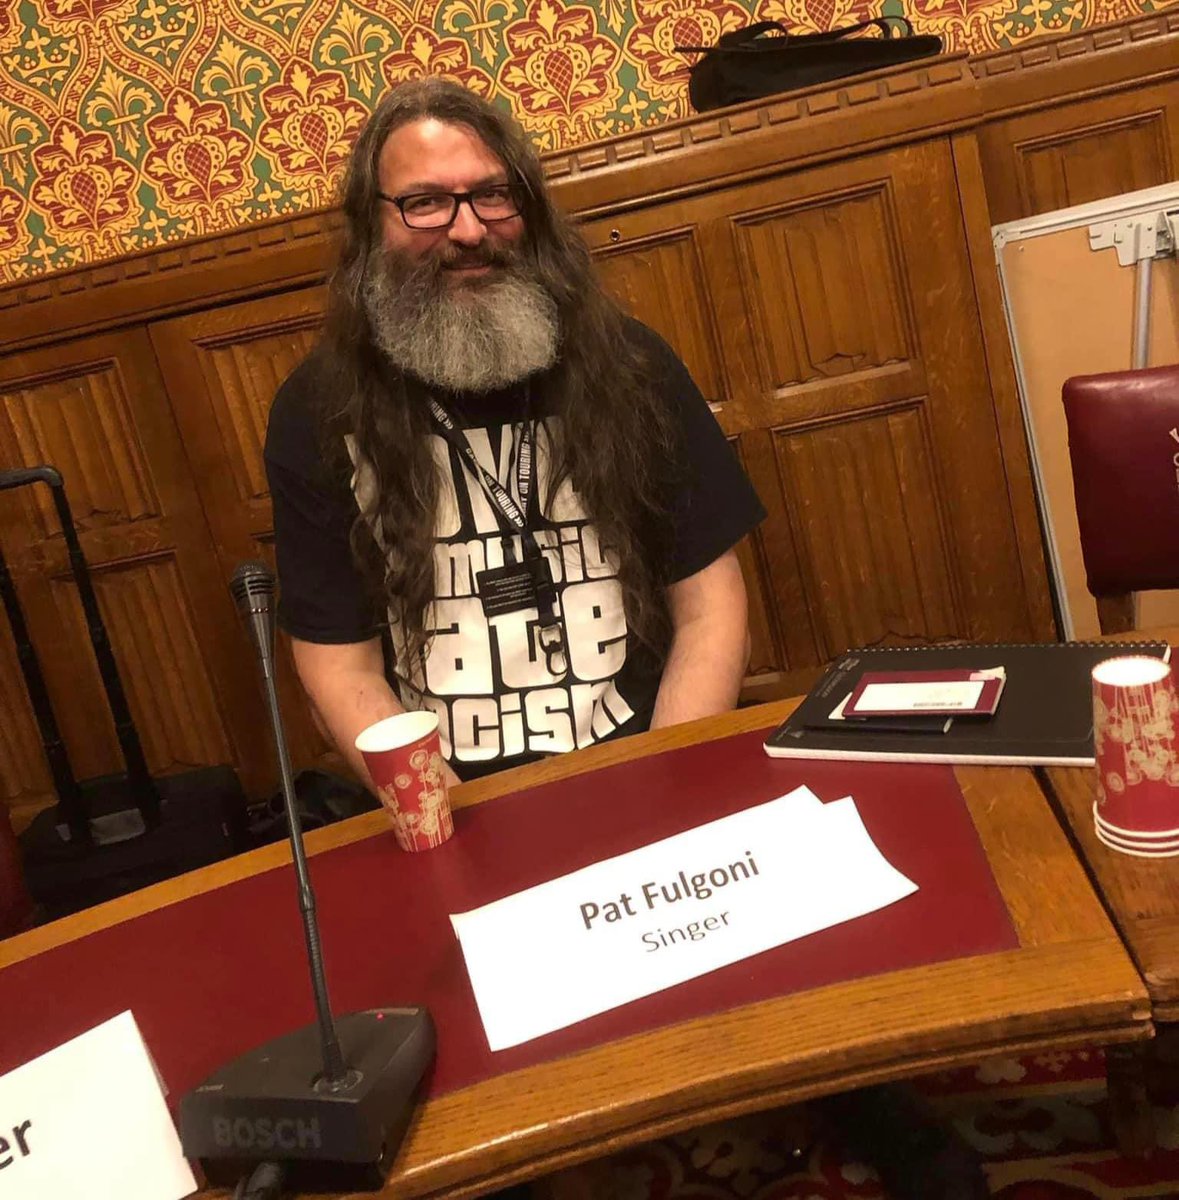 Select meeting at House Of Lords (at least a yr ago) #biggerpicture #antidelboy with the mighty Carry On Touring demanding MPs and Lords help the music biz survive. Blimey. Have they? The way the pittance of funding is allocated needs looking at too imo #musicbiz #musicindustry